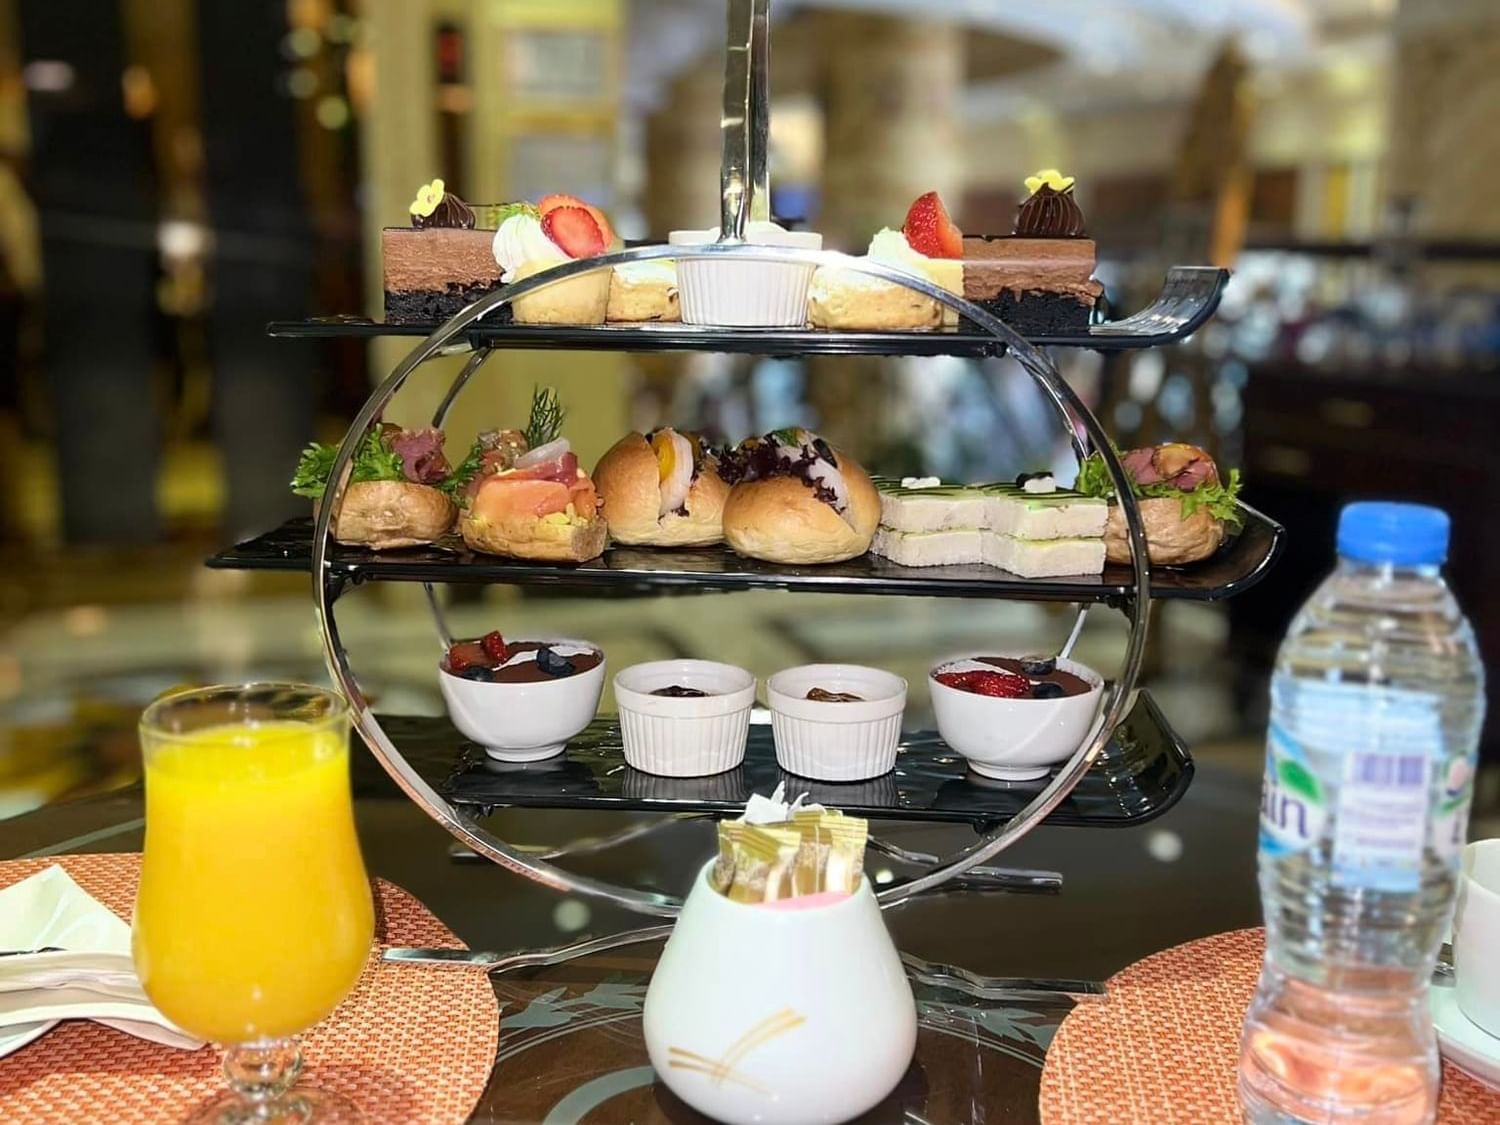 Afternoon tea served in Brasserie Café at City Seasons Hotels